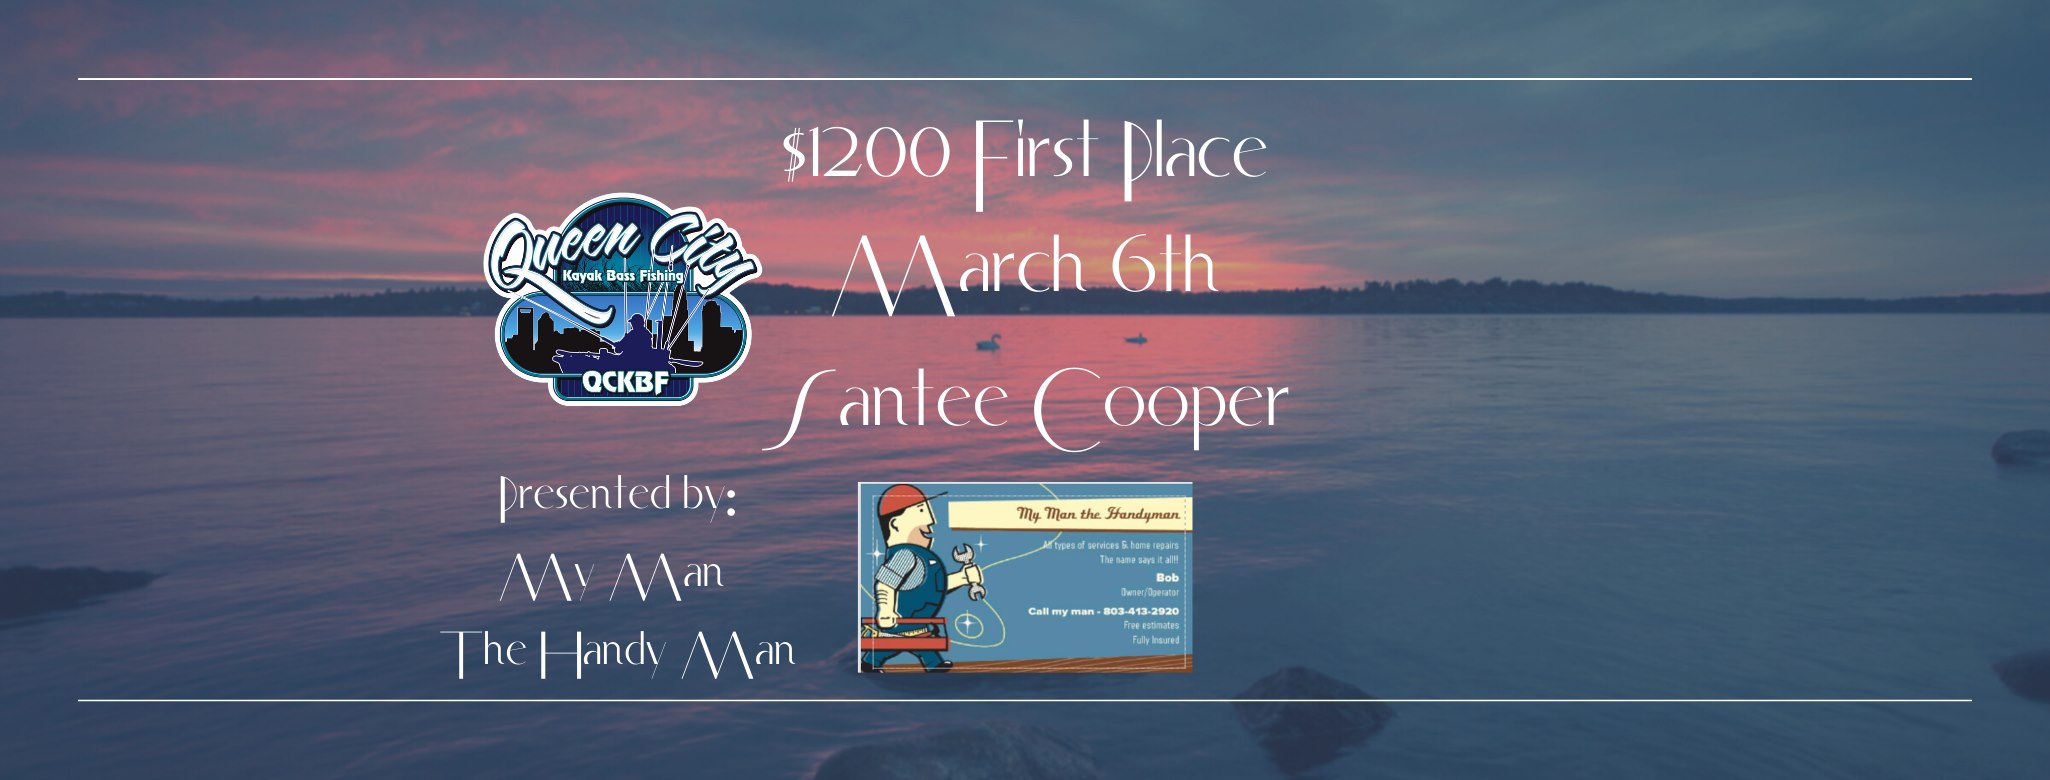 Event 3 Santee Cooper presented by My Man the Handyman